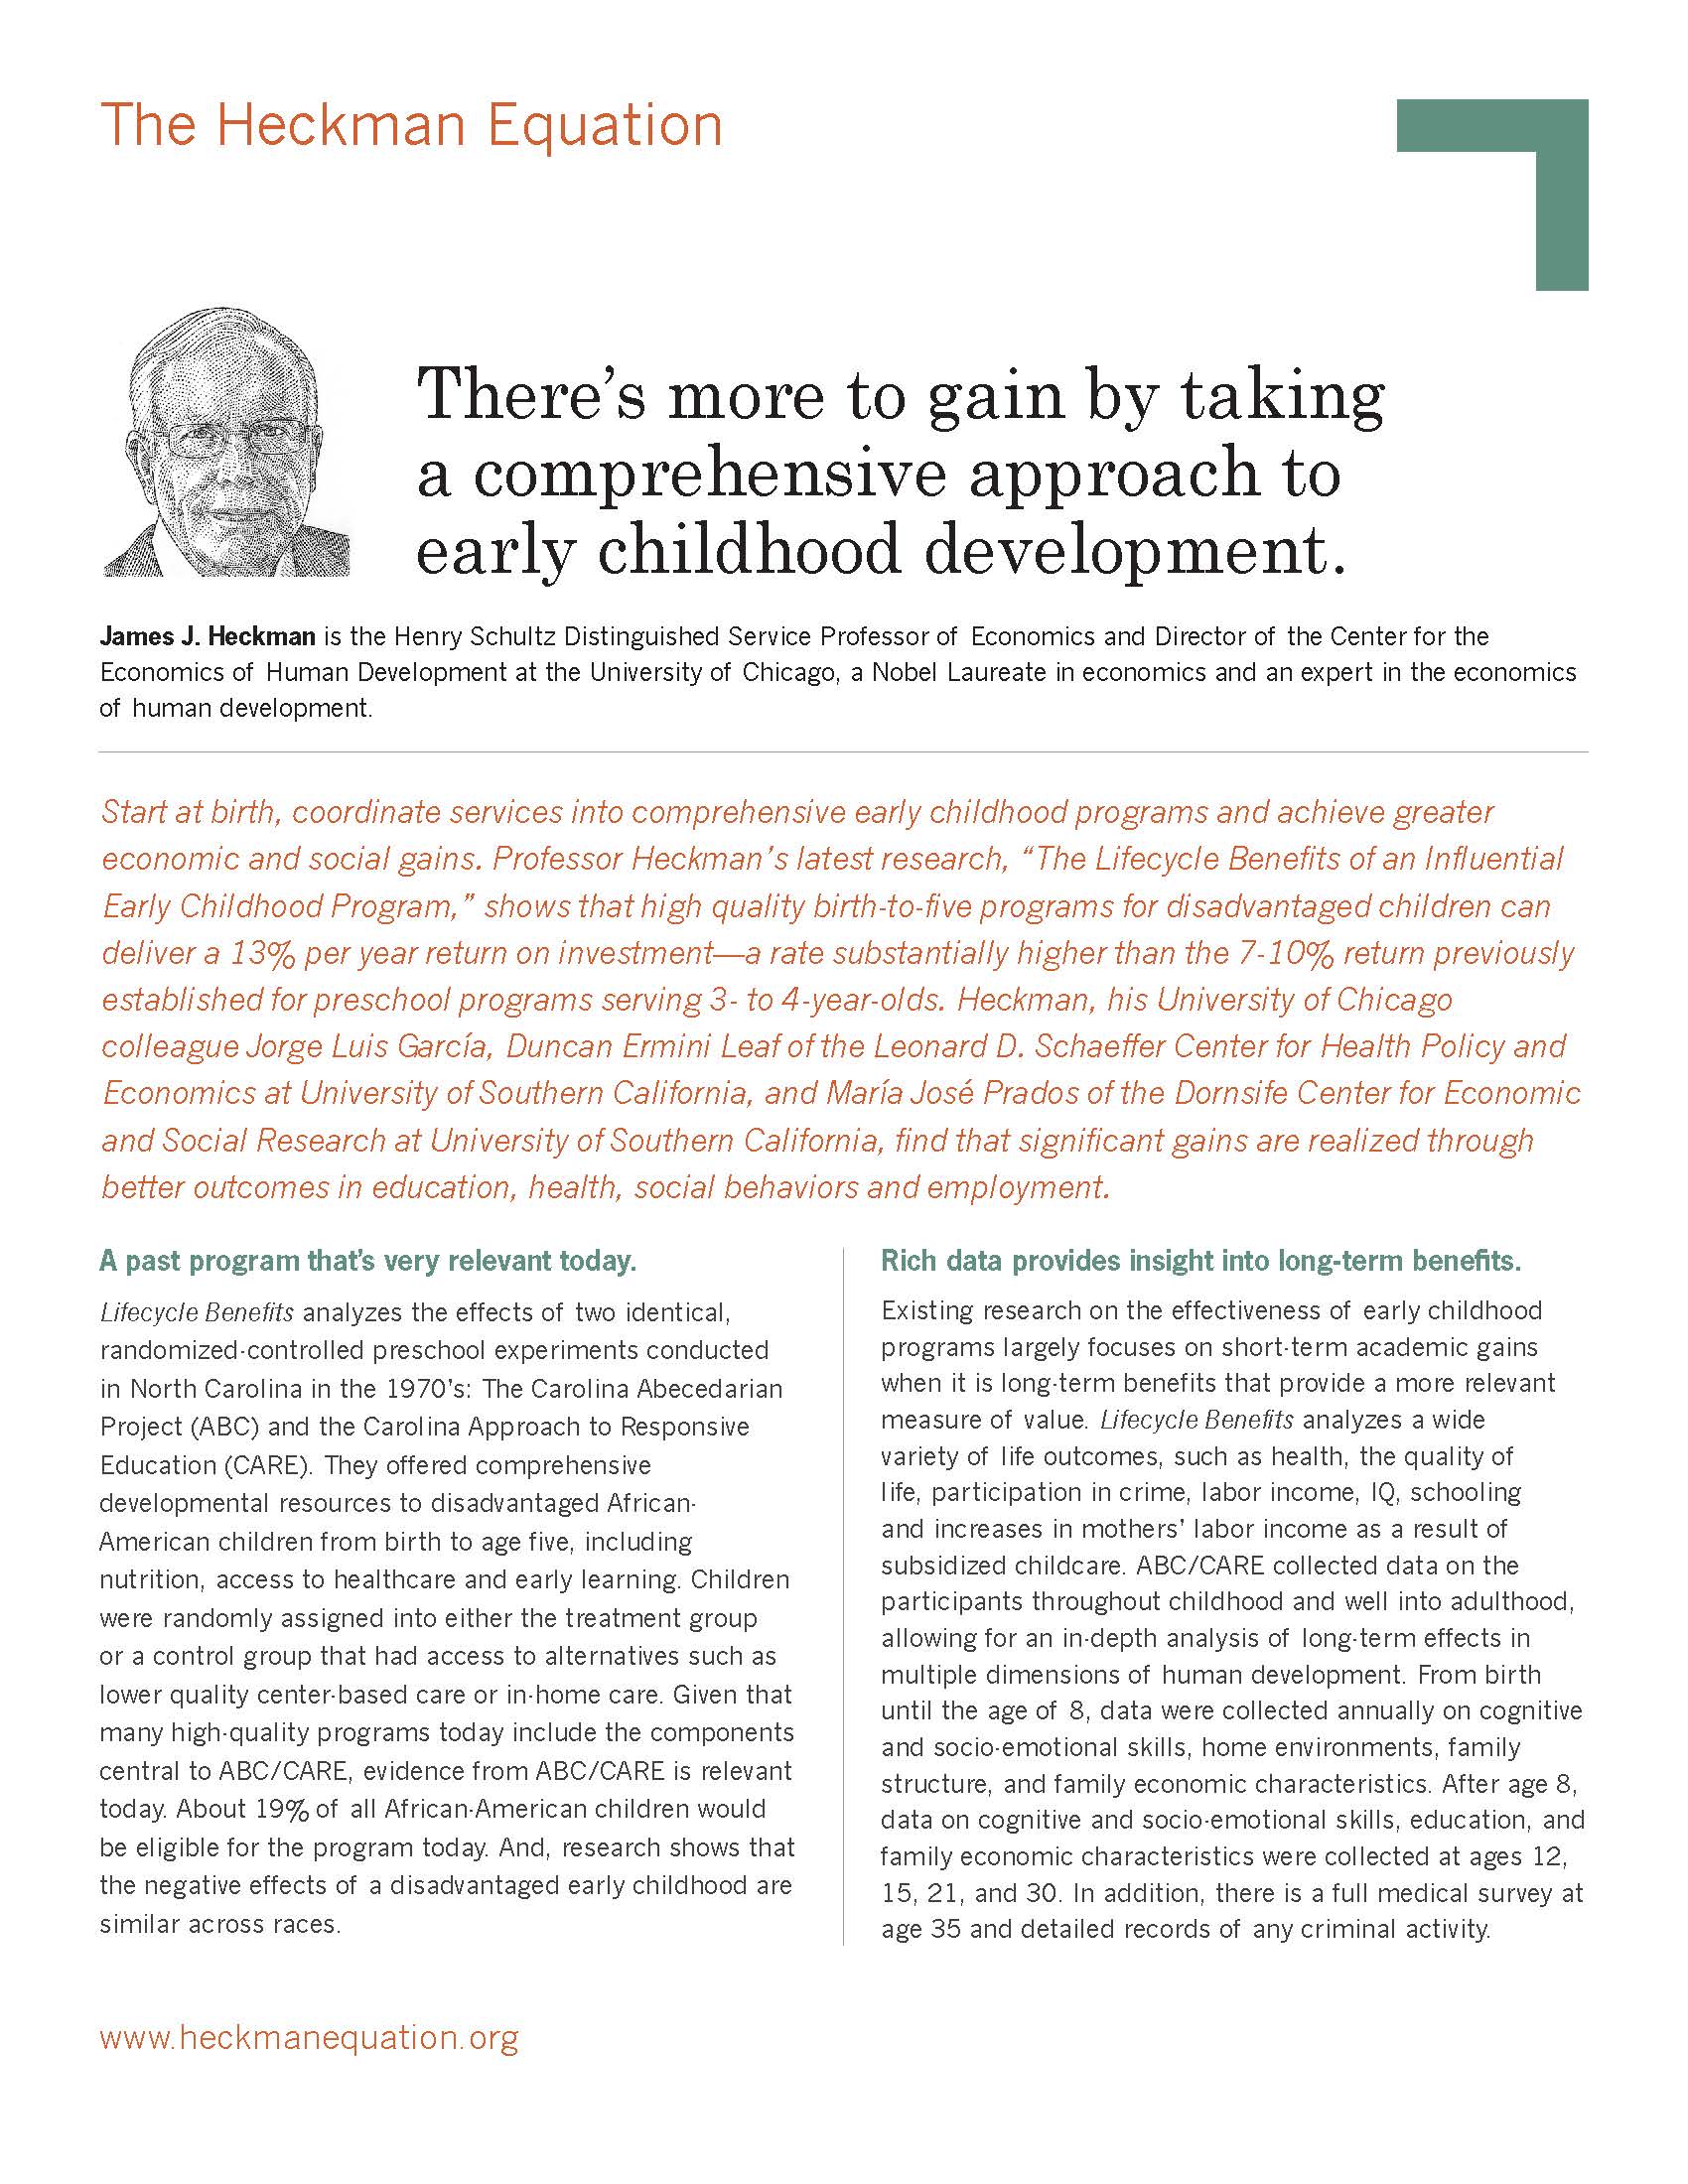 Screenshot of article "There's more to gain by taking a comprehensive approach to early childhood development."